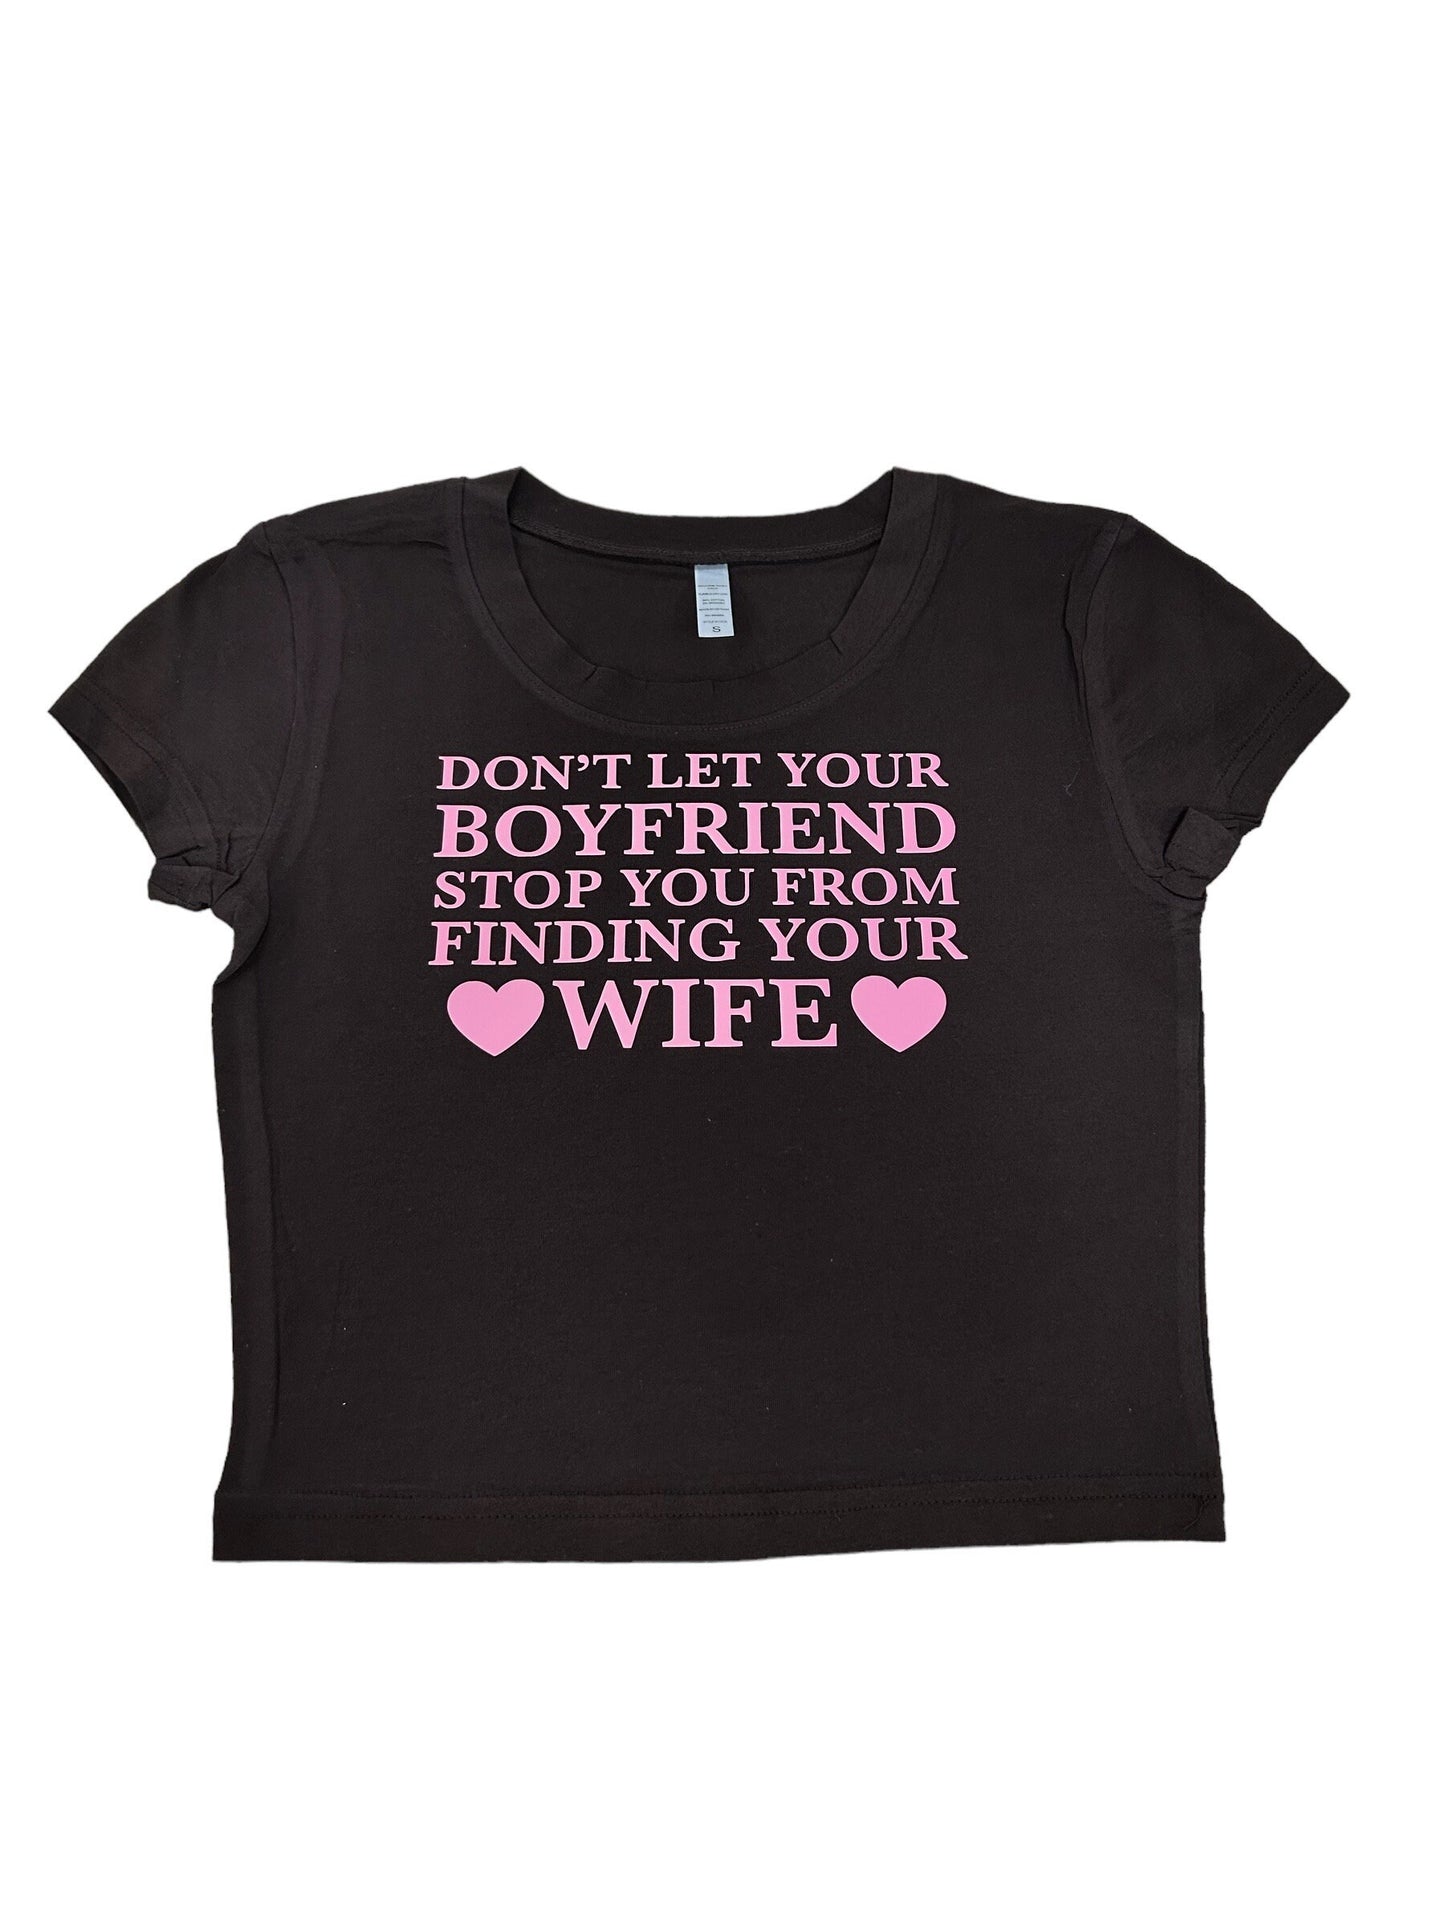 Don’t Let Your Boyrfriend Stop You From Finding Your Wife Y2K crop top tee shirt